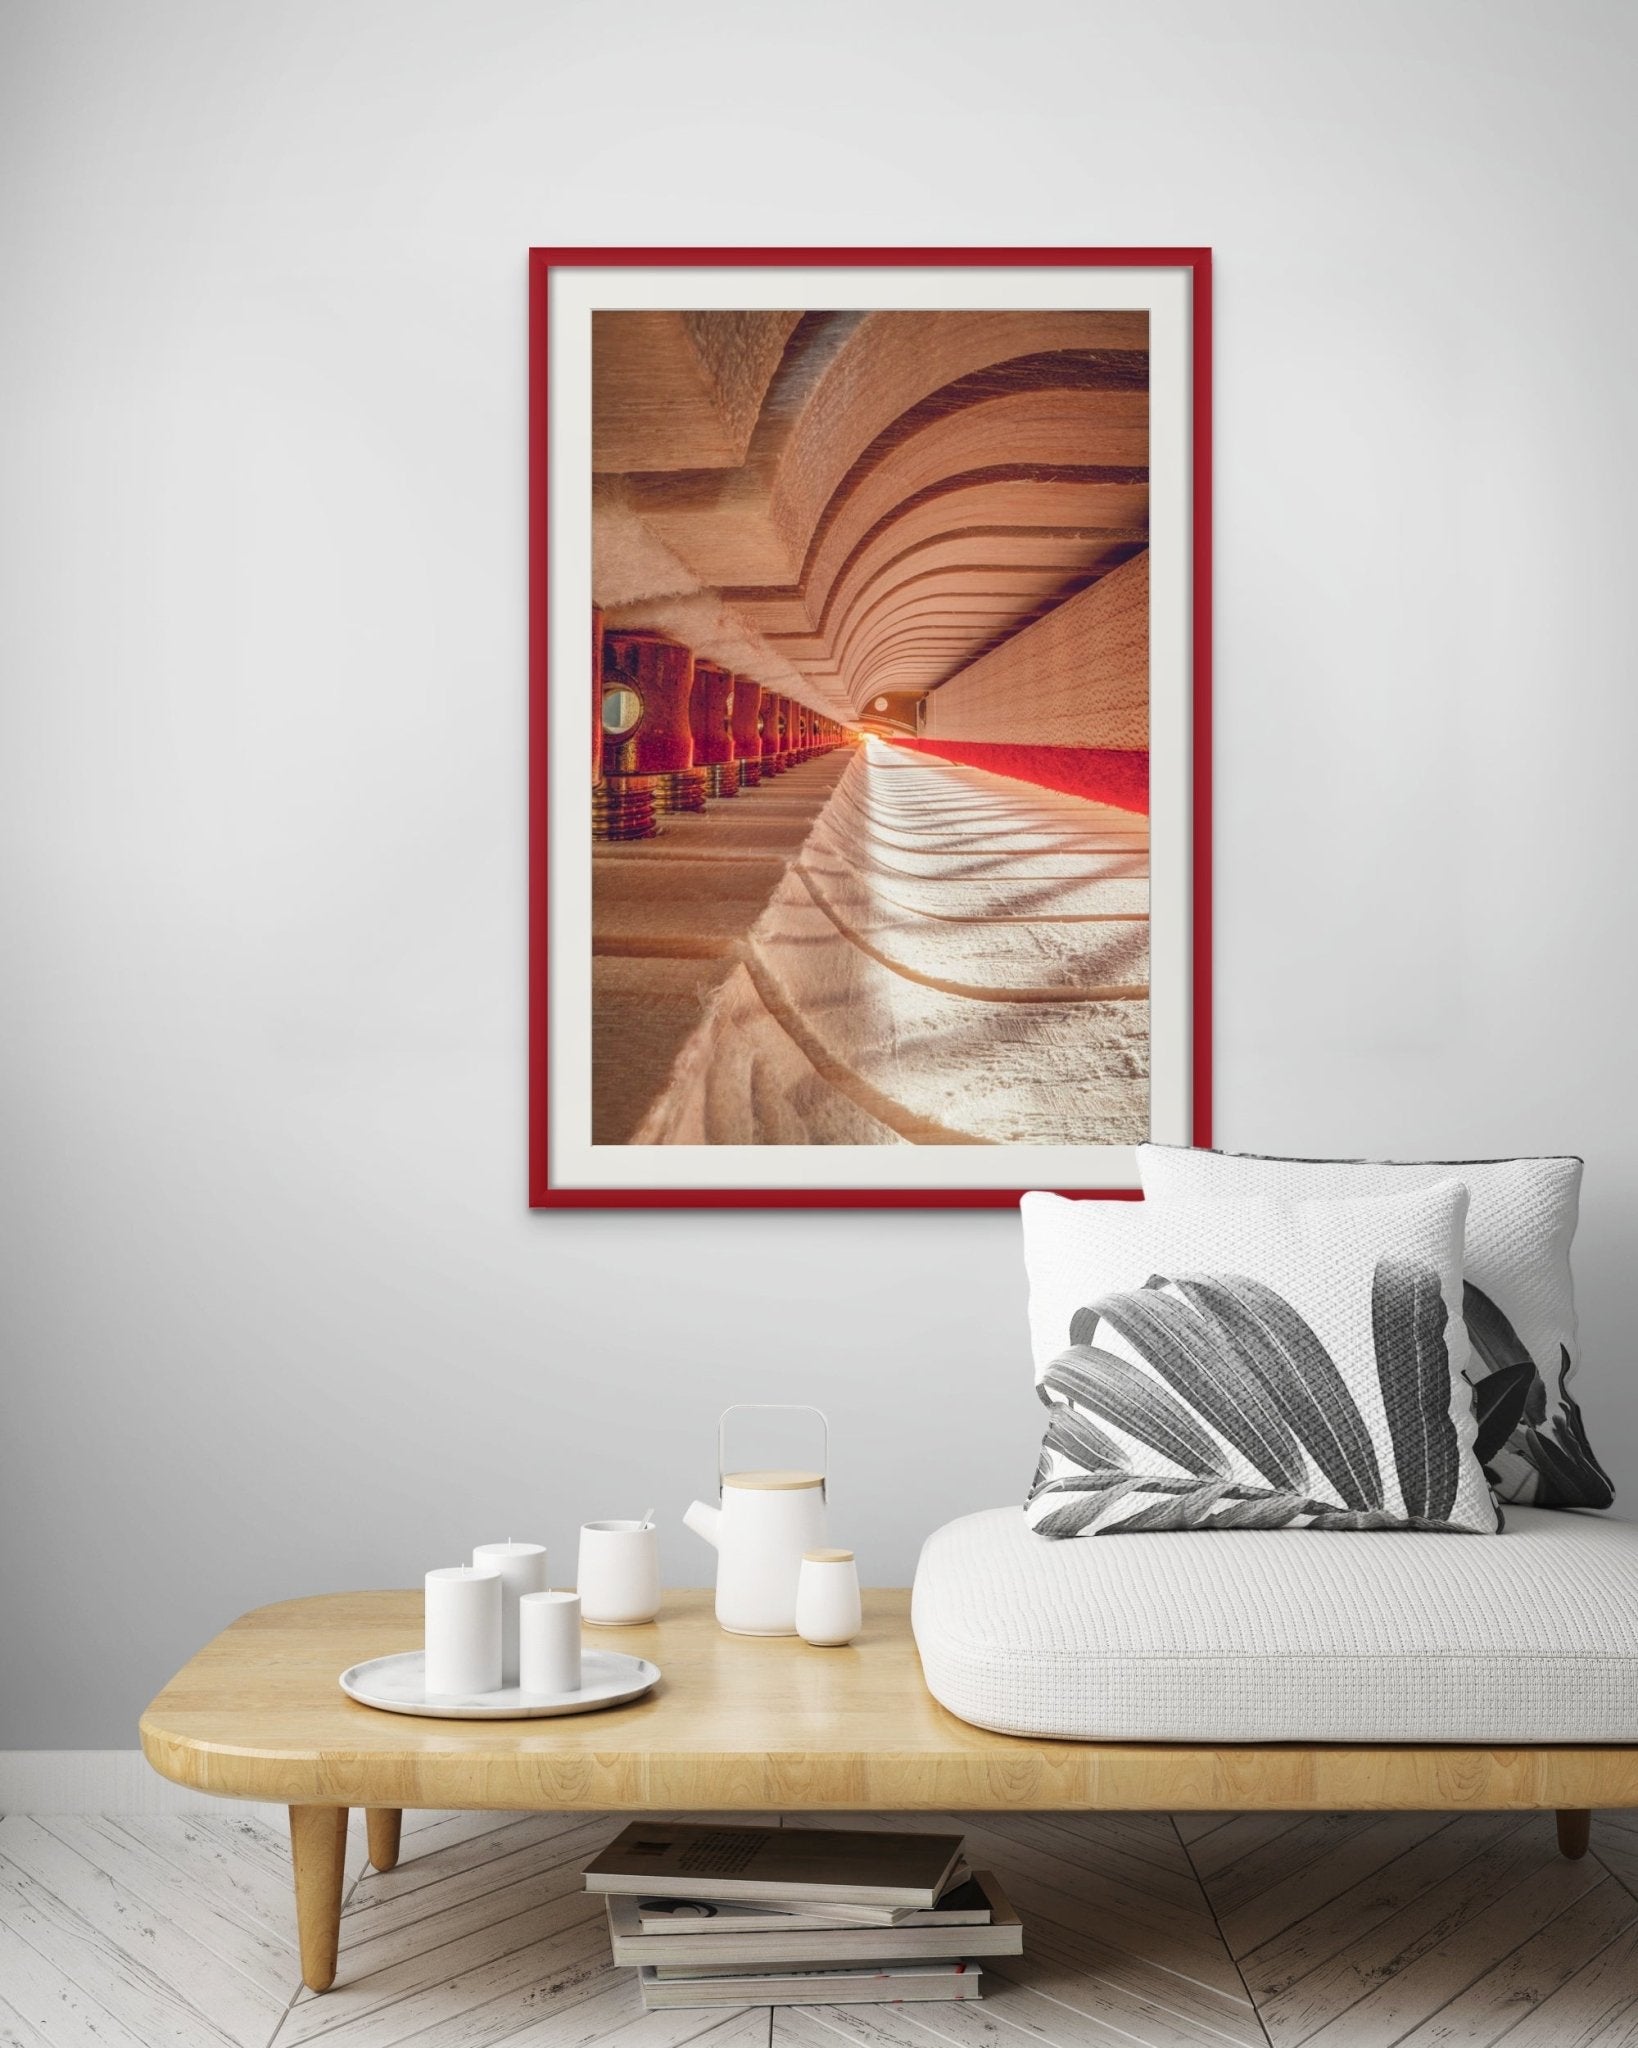 Photo of The Exquisite Architecture of Steinway, Part 8. Signed Limited Edition Museum Quality Print. - Giclée Museum Quality Print - Architecture In Music